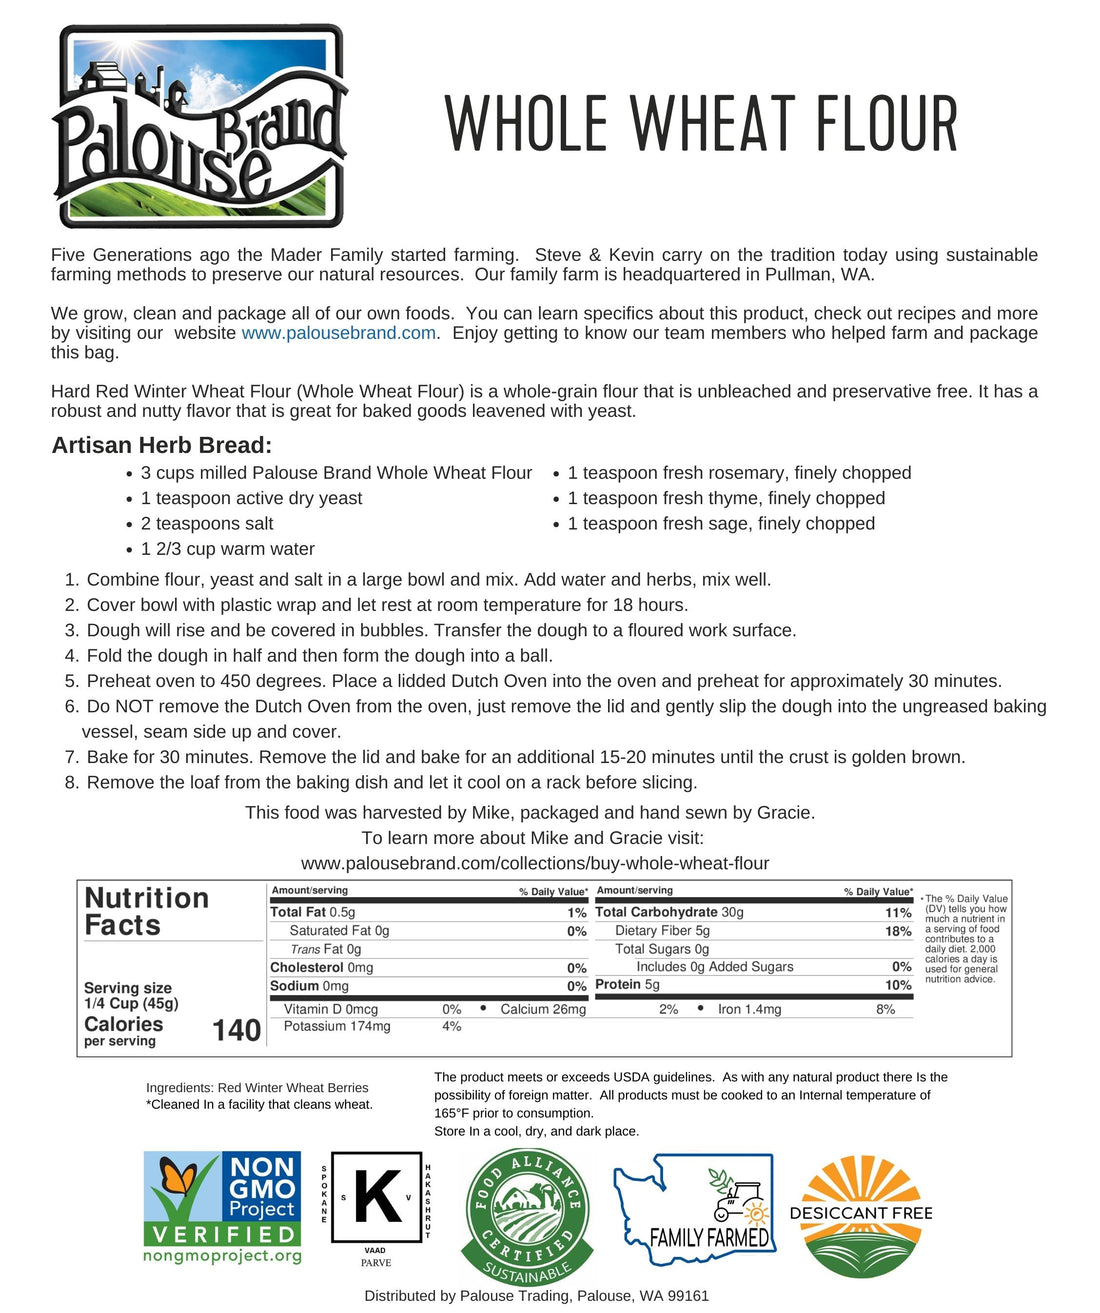 Nutrition Facts for Washington State Stone Ground Hard Red Spring Wheat Berries